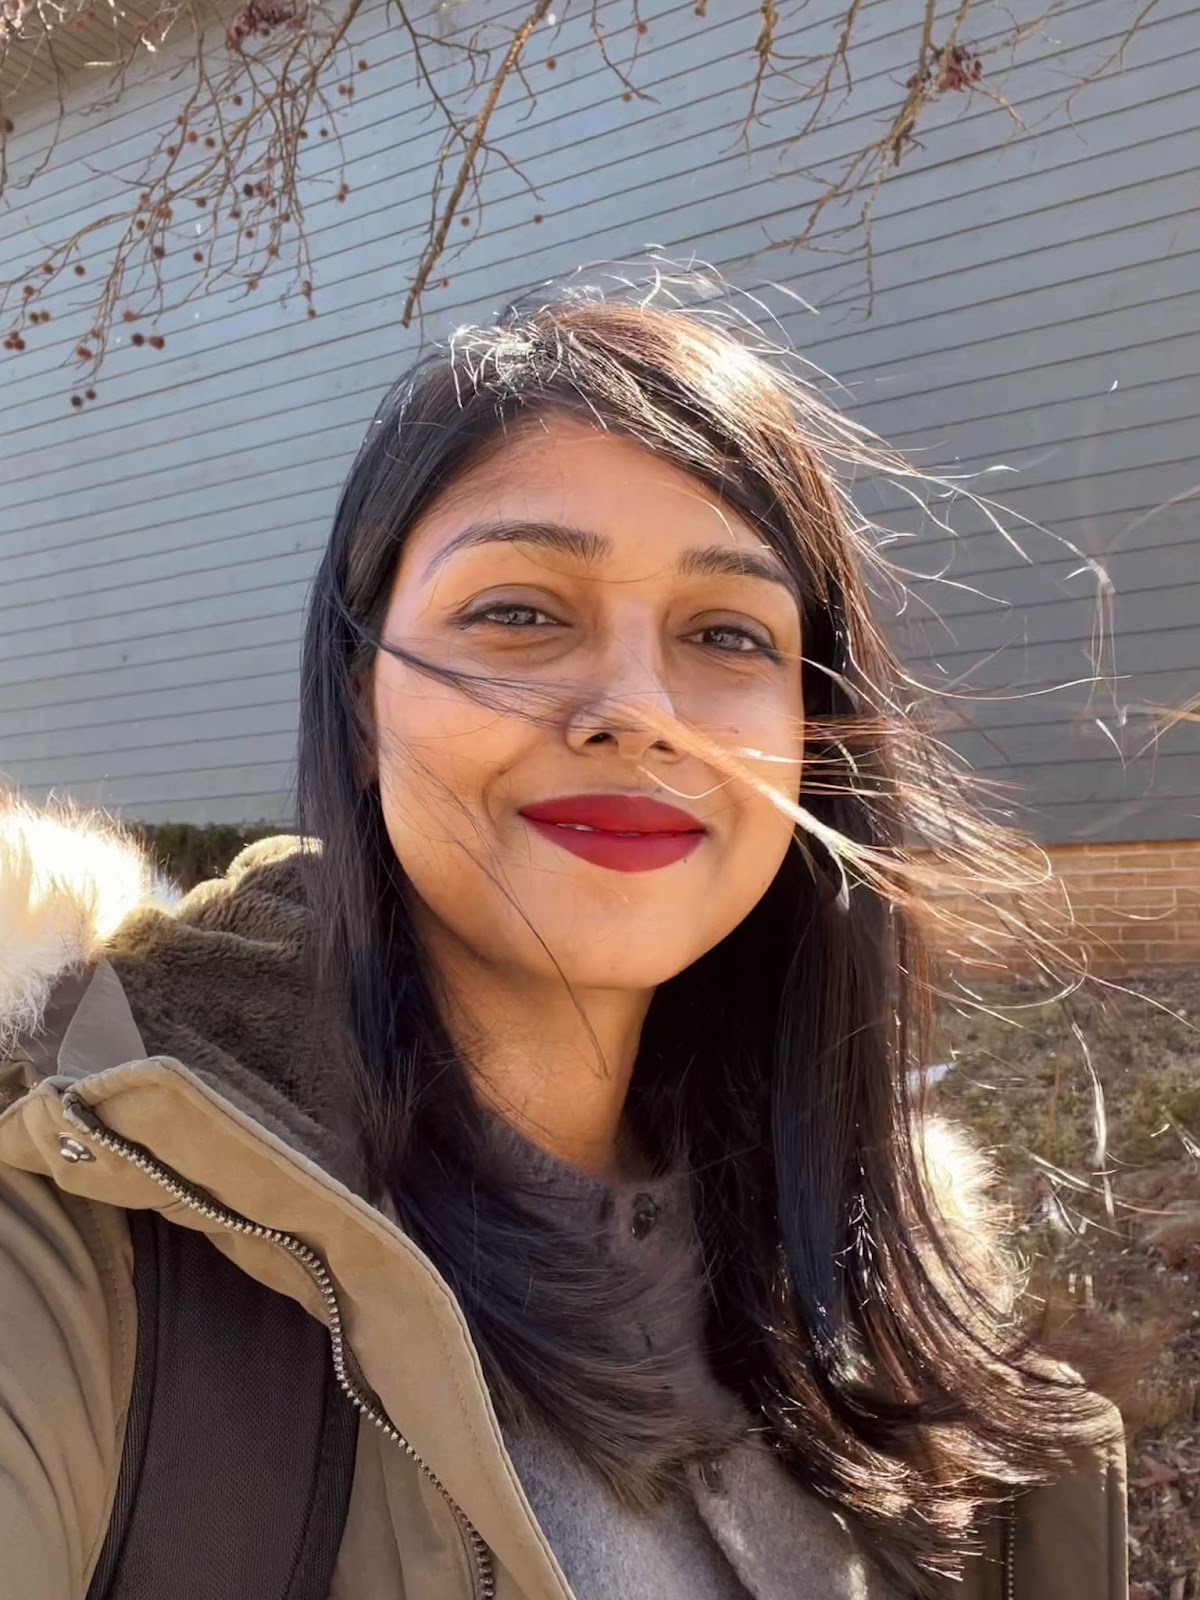 Nidhi, a South Asian woman with black hair, smiles at the camera against the wall of a grey wooden house. She’s wearing an olive winter coat with a fur hood over a grey sweater.